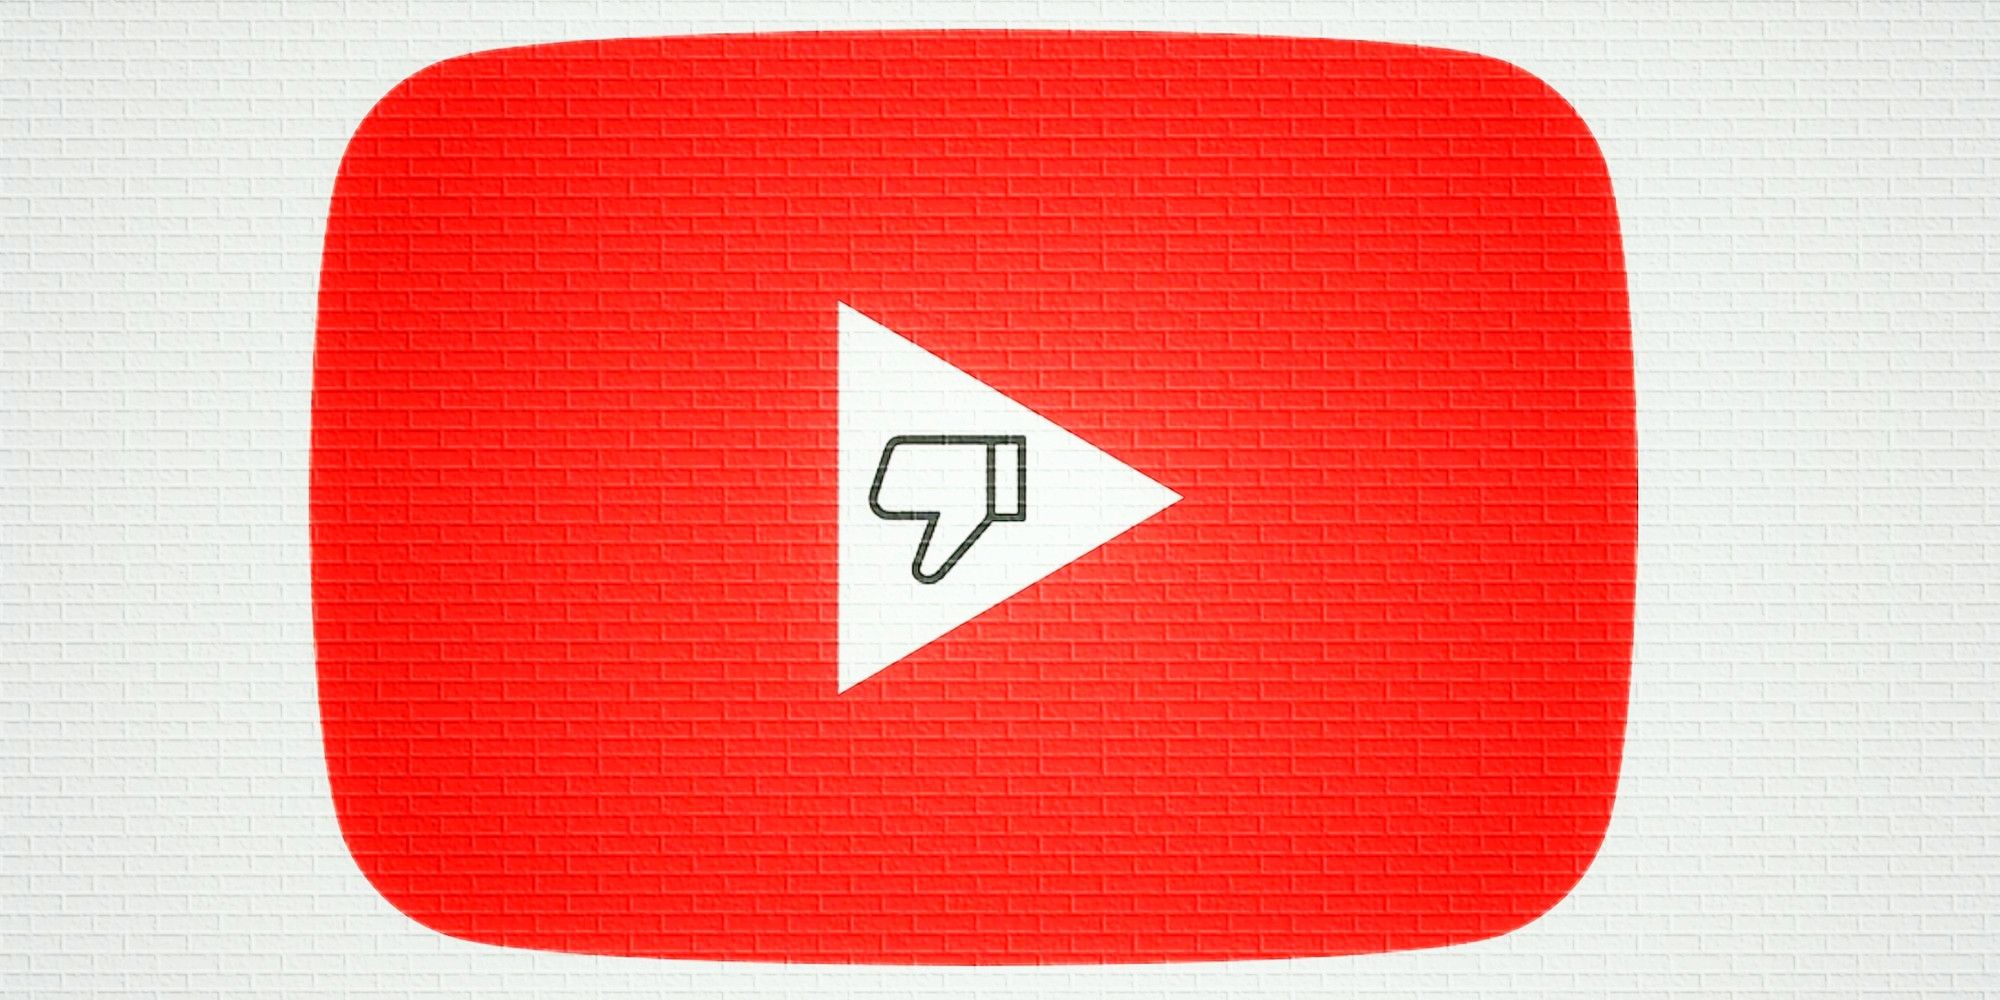 Why YouTube Is Hiding The Number Of Dislikes On Videos